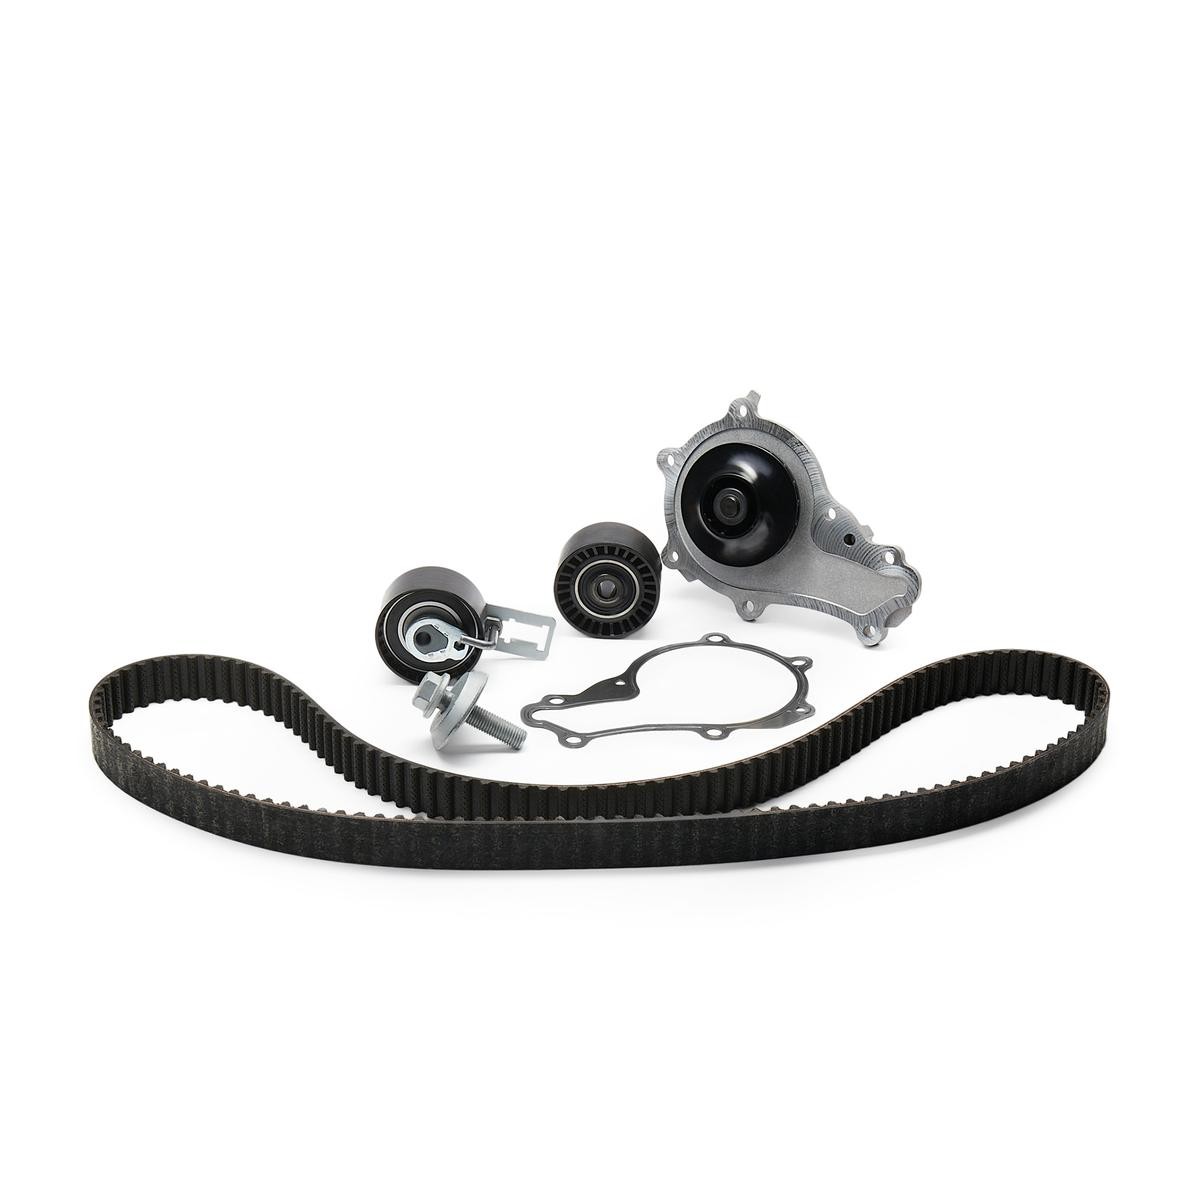 Ford Focus mk3 Saloon Belts, chains, rollers parts - Water pump and timing belt kit CONTITECH CT1162WP5